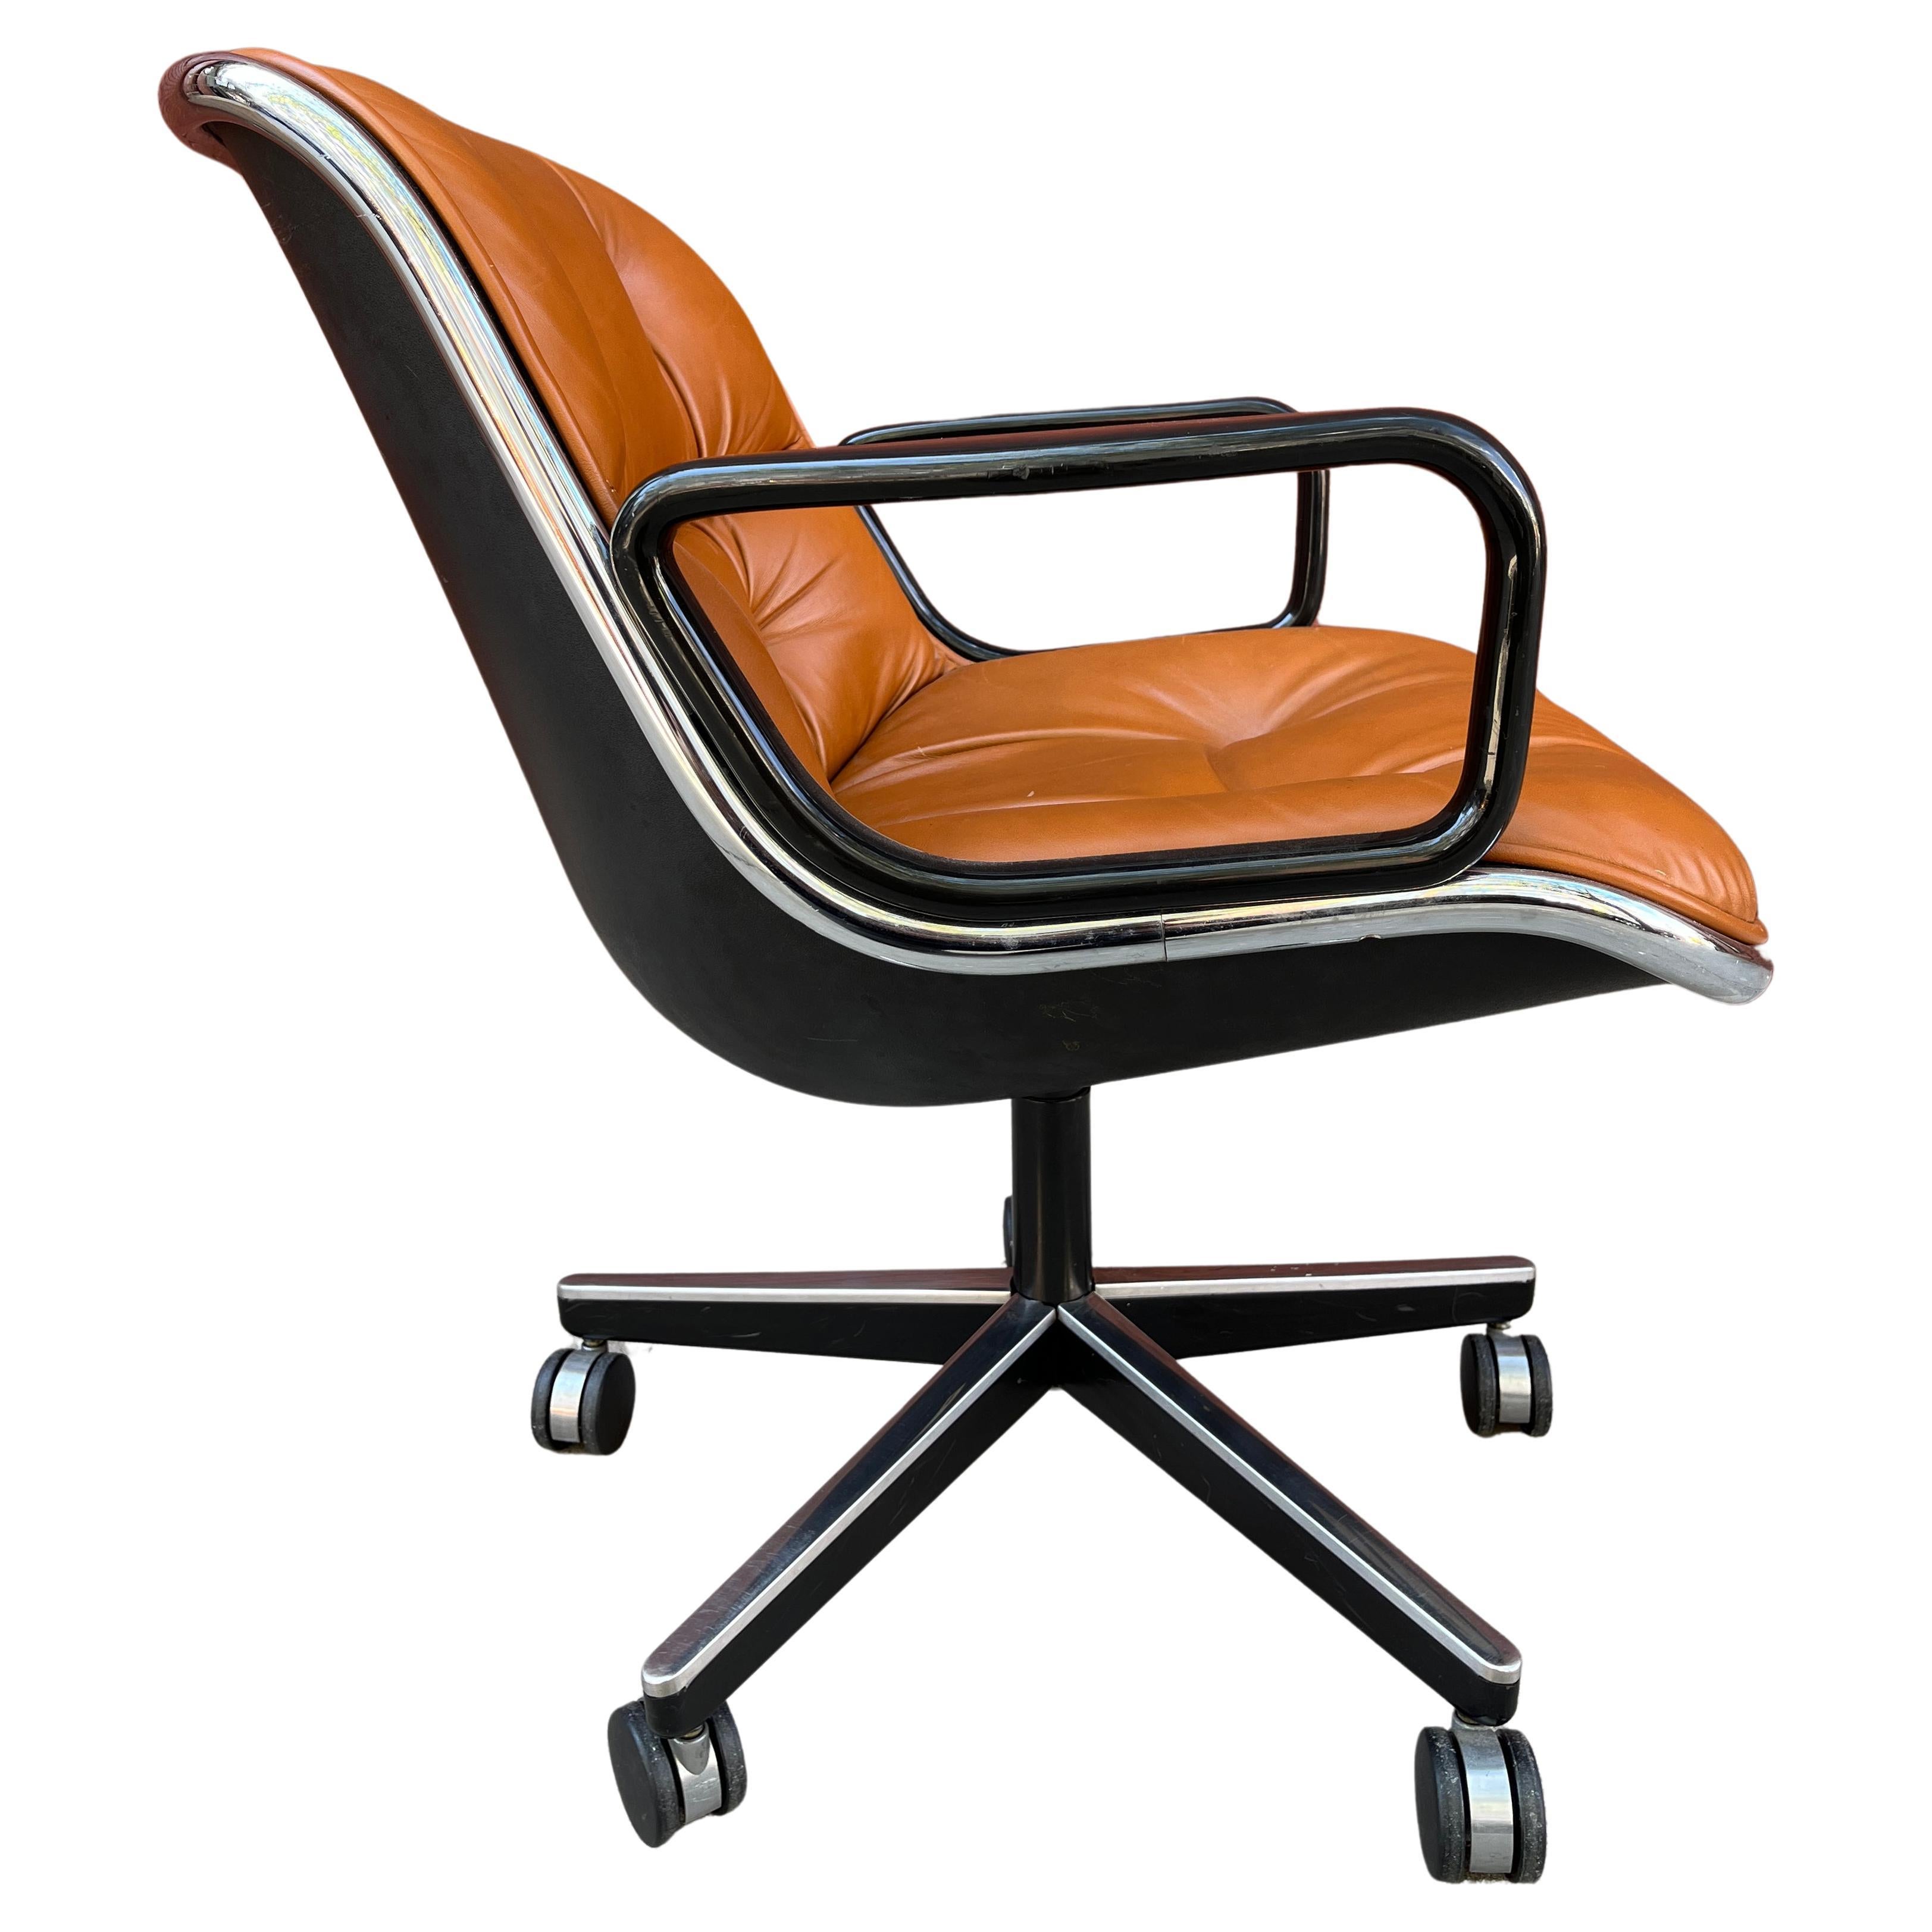 American Executive Chair by Charles Pollock for Knoll